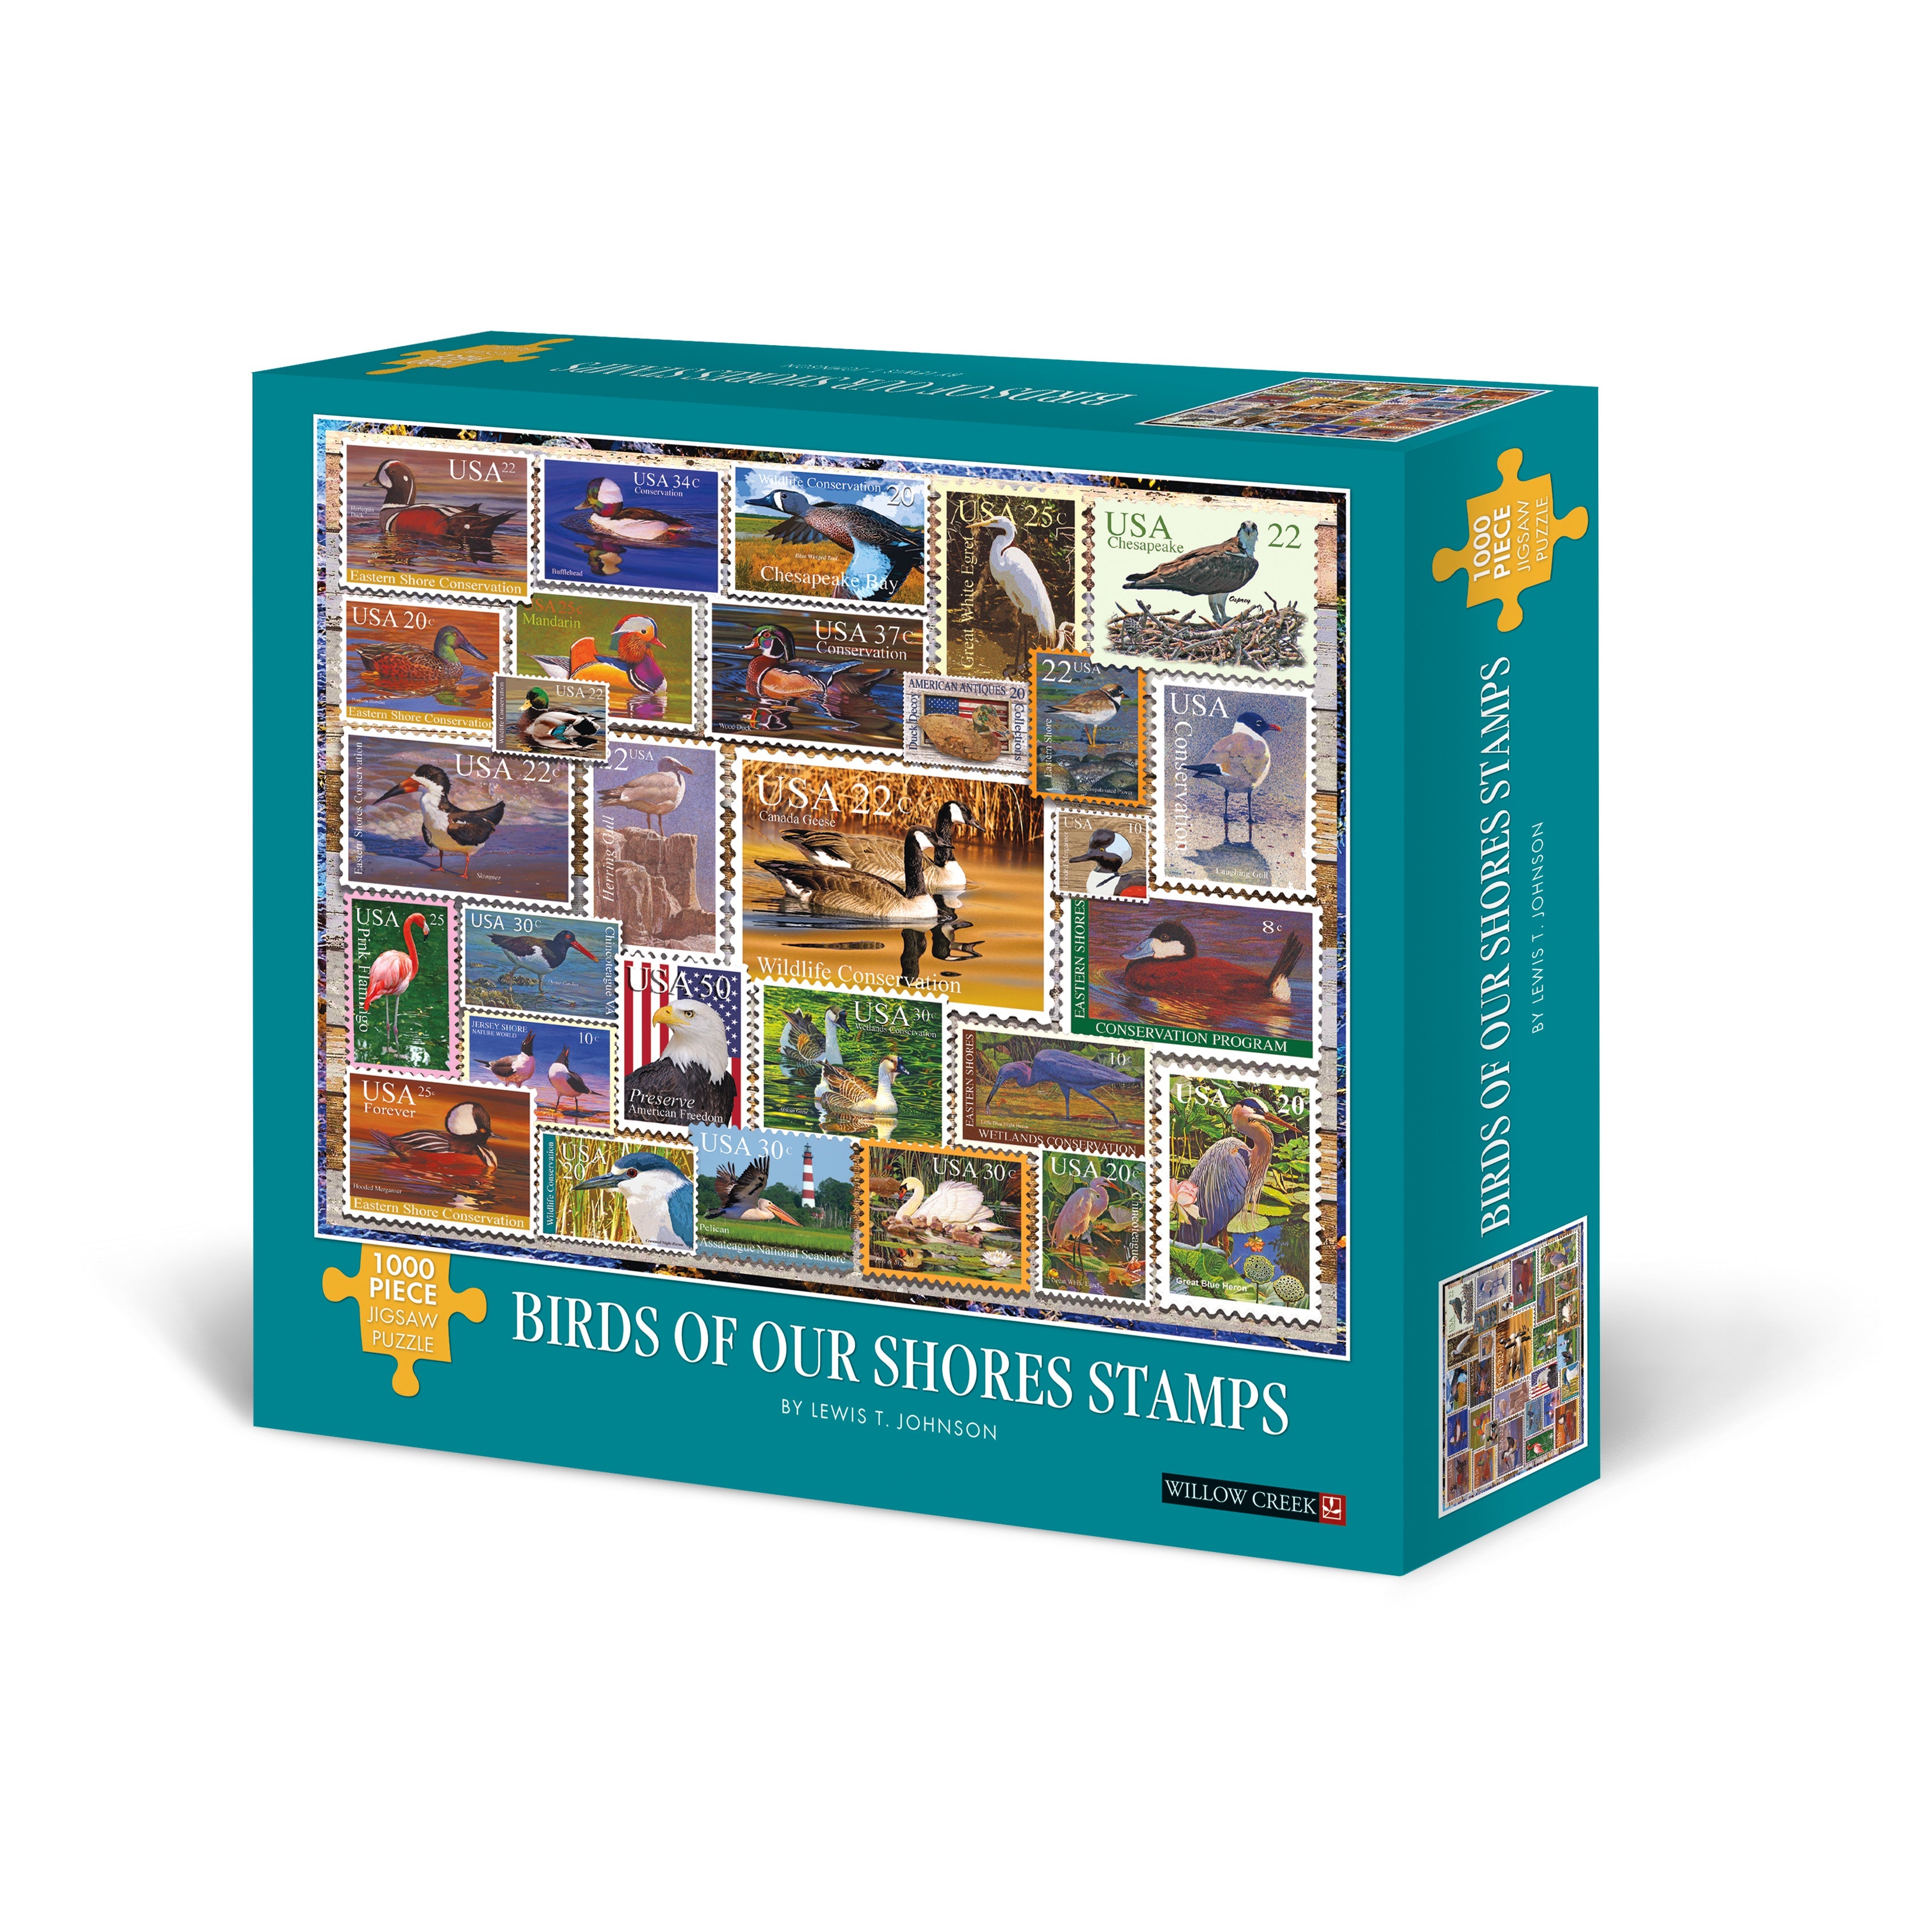 Birds of Our Shores Stamps 1000 Piece - Jigsaw Puzzle